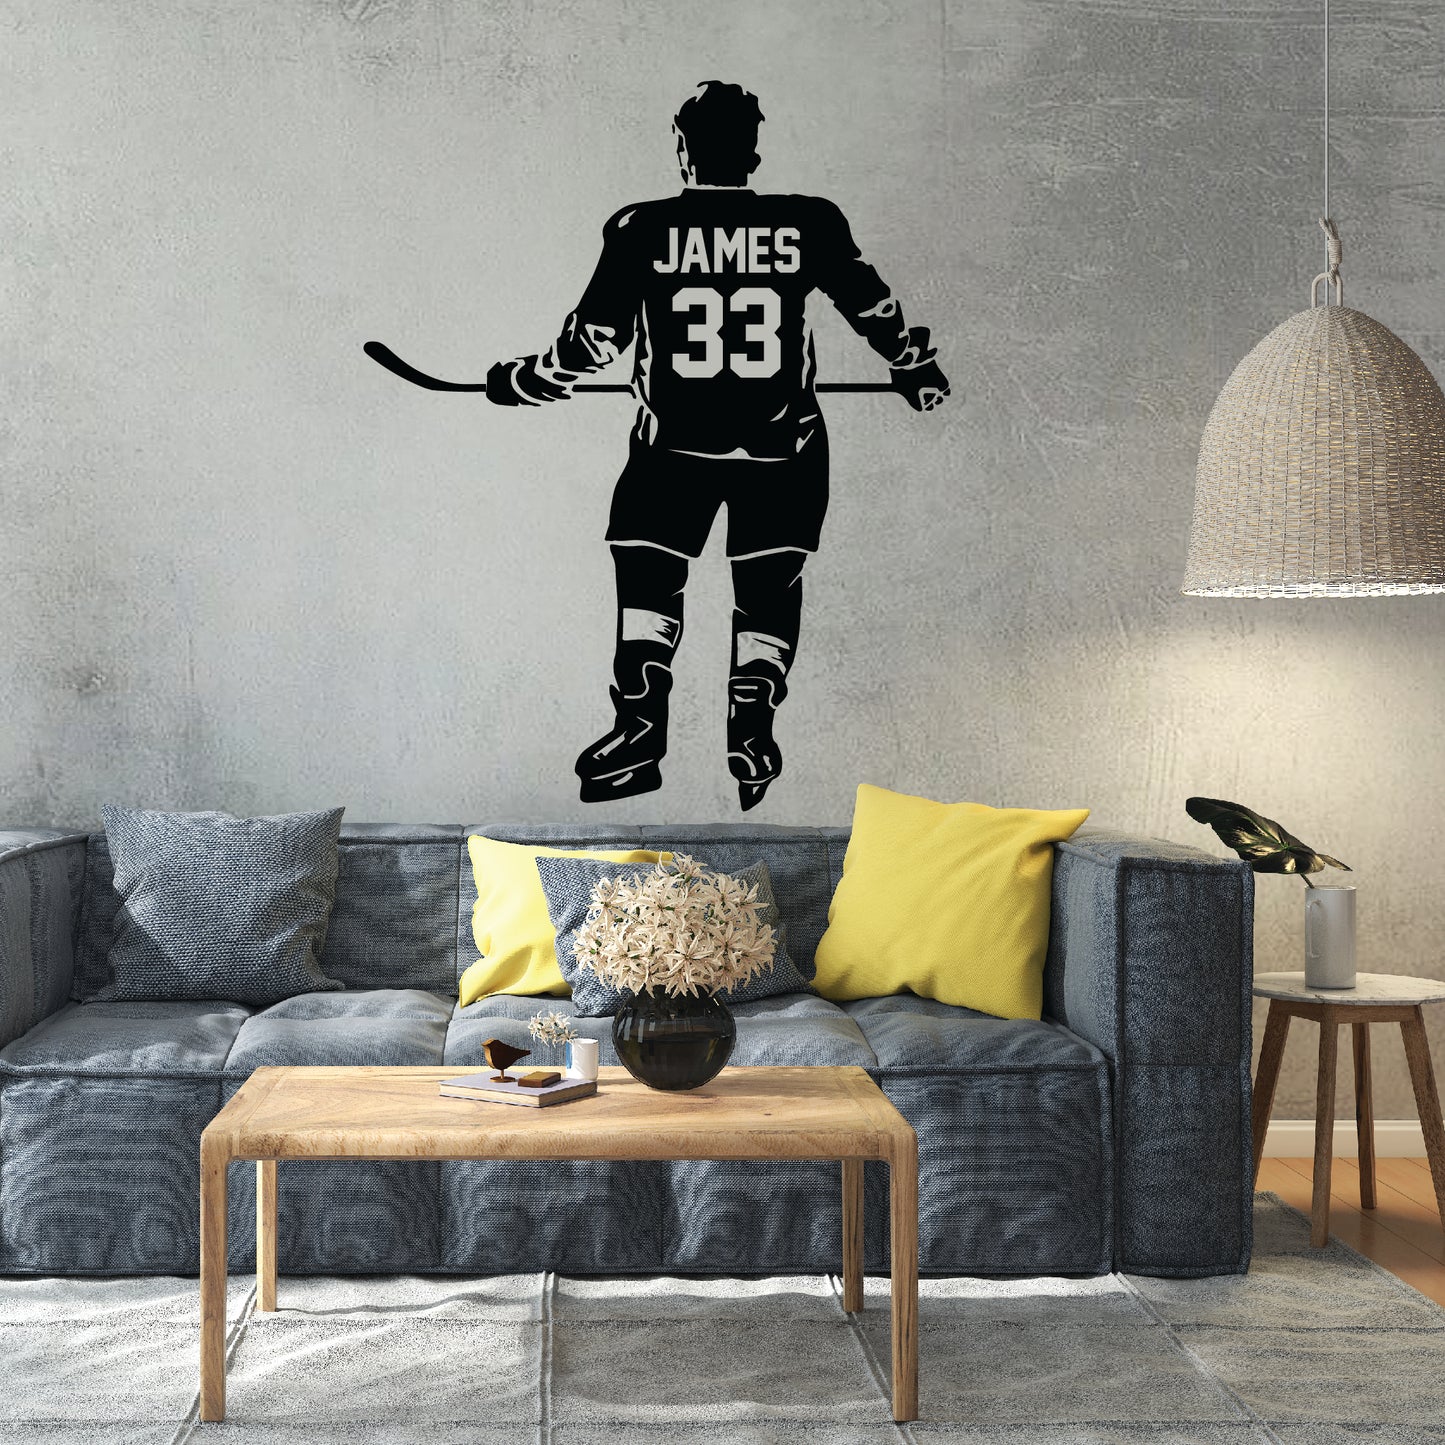 hockey-decal-with-name-number